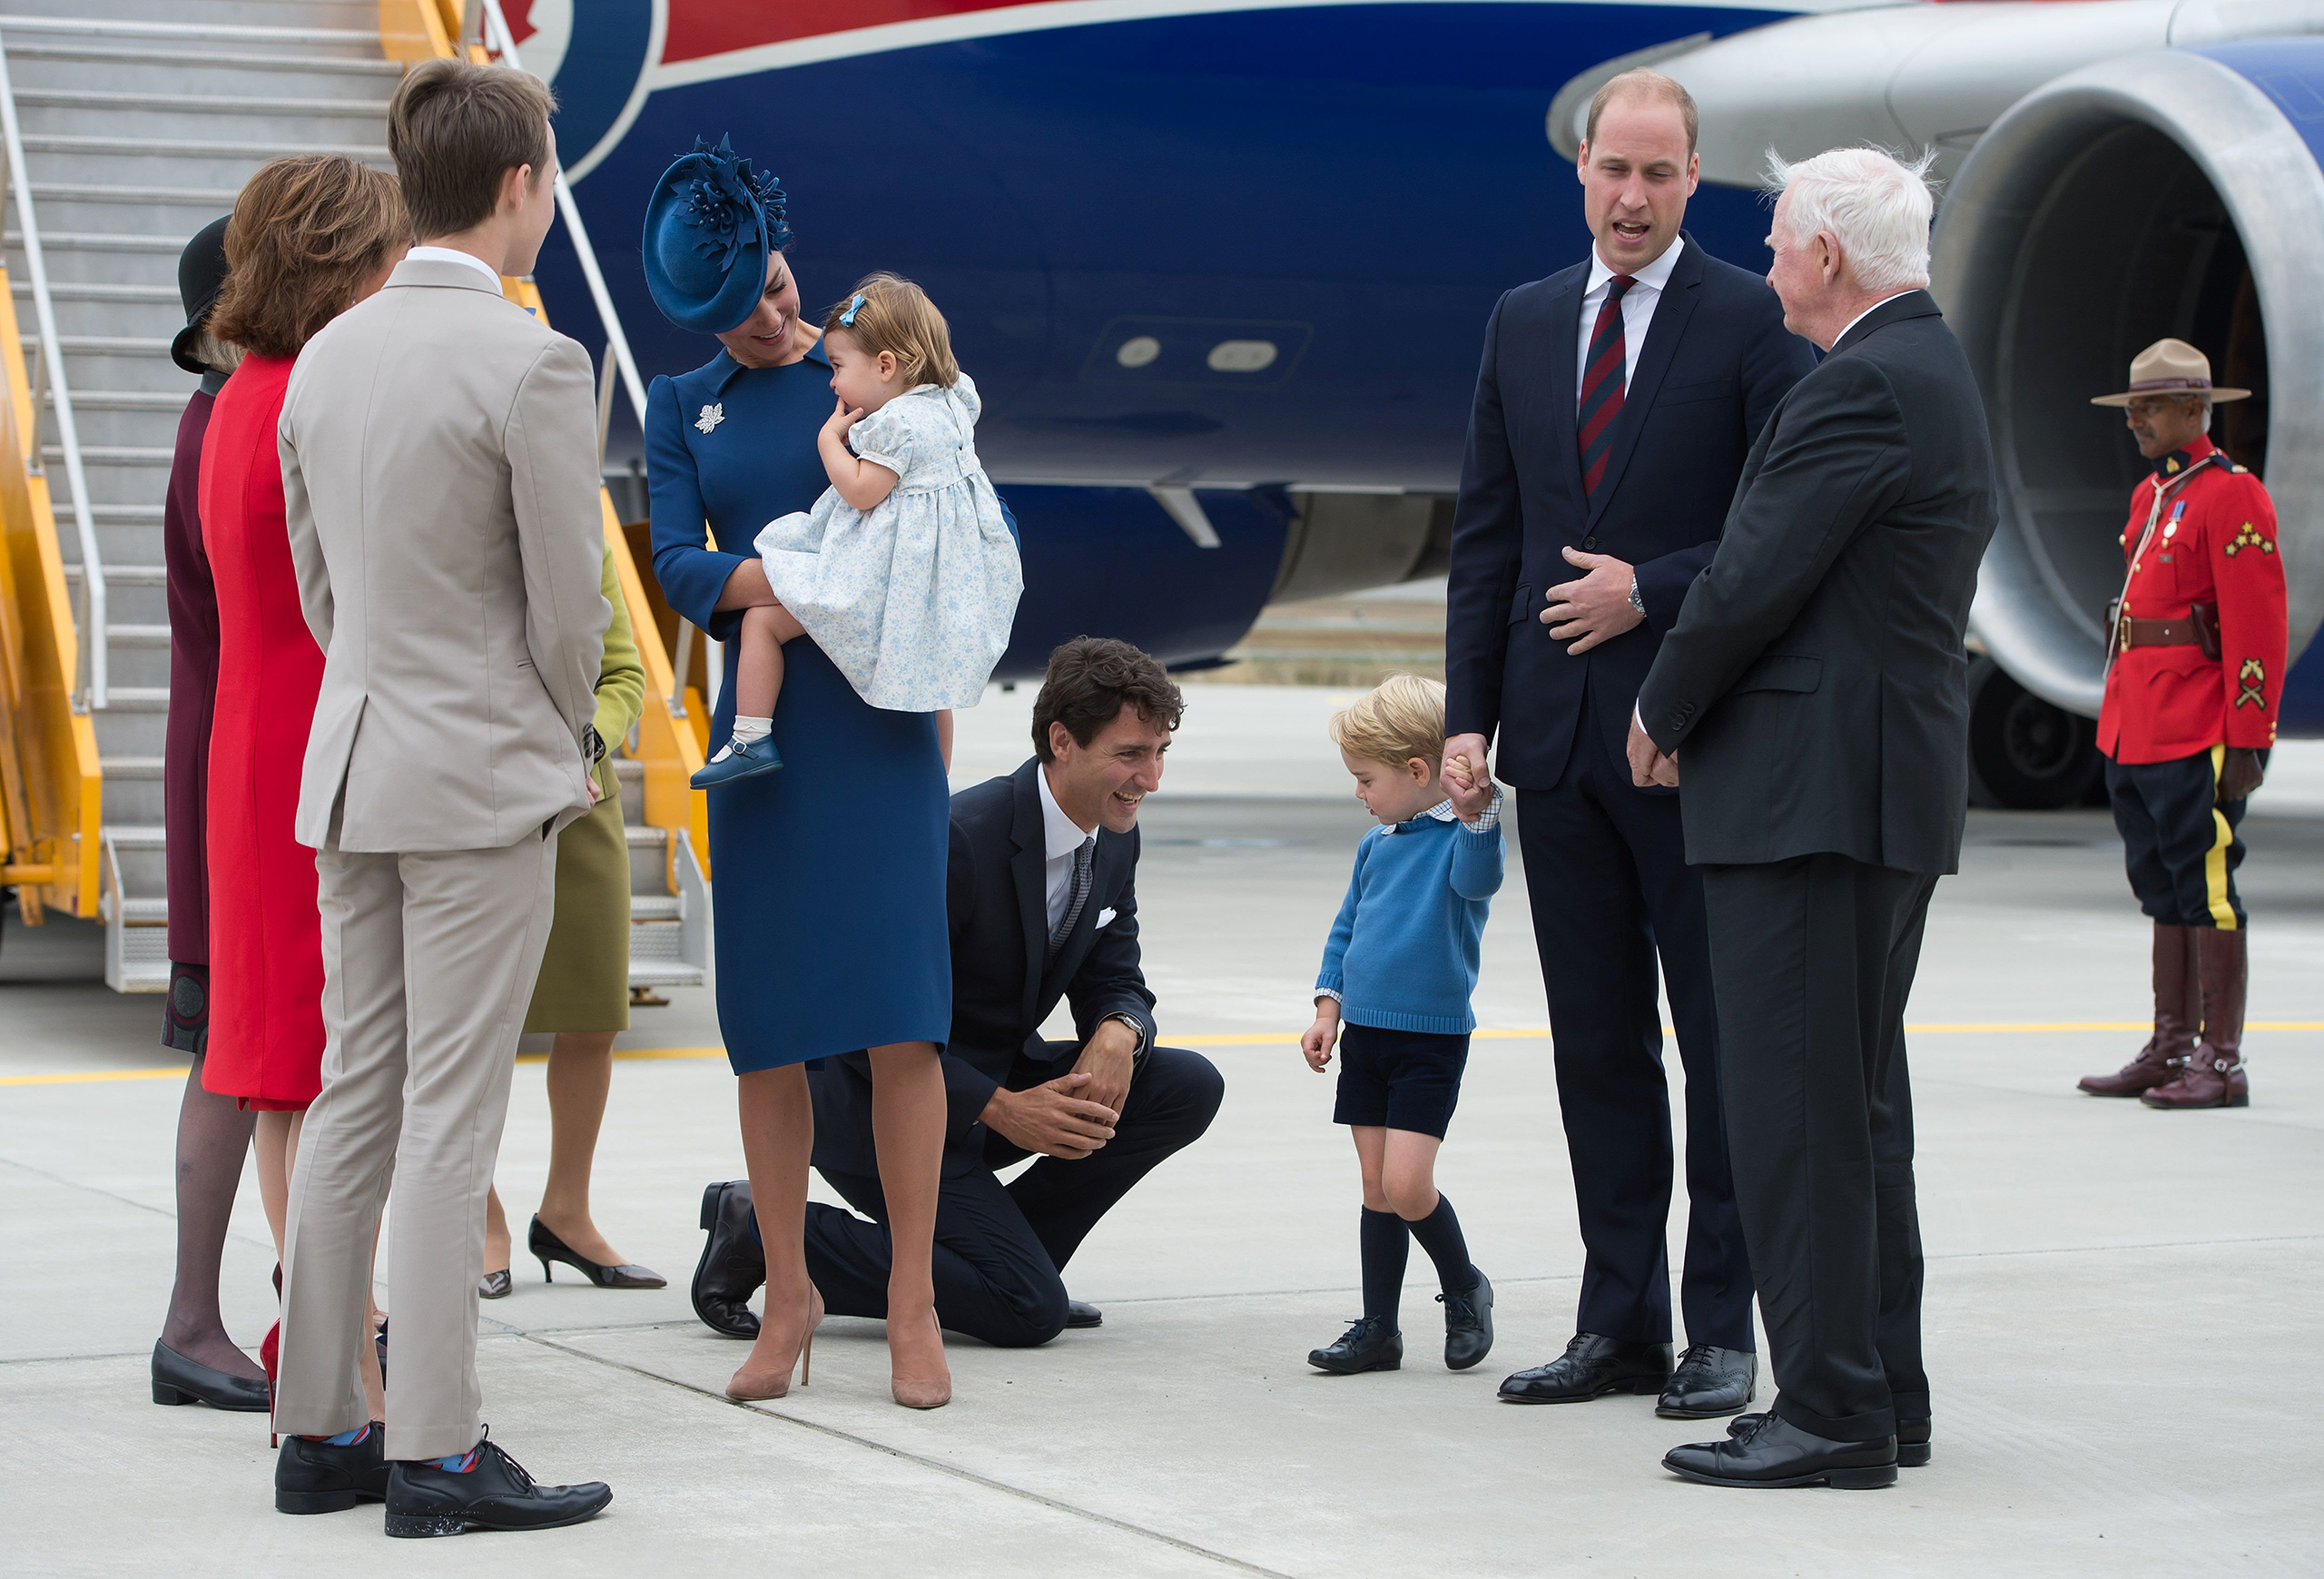 Canadian Prime Minister Justin Trudeau kneels to talk to Prince George as his father Prince William, The Duke of Cambridge, speaks with the Governor General David Johnston and Catherine, The Duchess of Cambridge, holds their daughter Princess Charlotte upon arrival at 443 Maritime Helicopter Squadron base on in Victoria, British Columbia, Sept. 24, 2016.